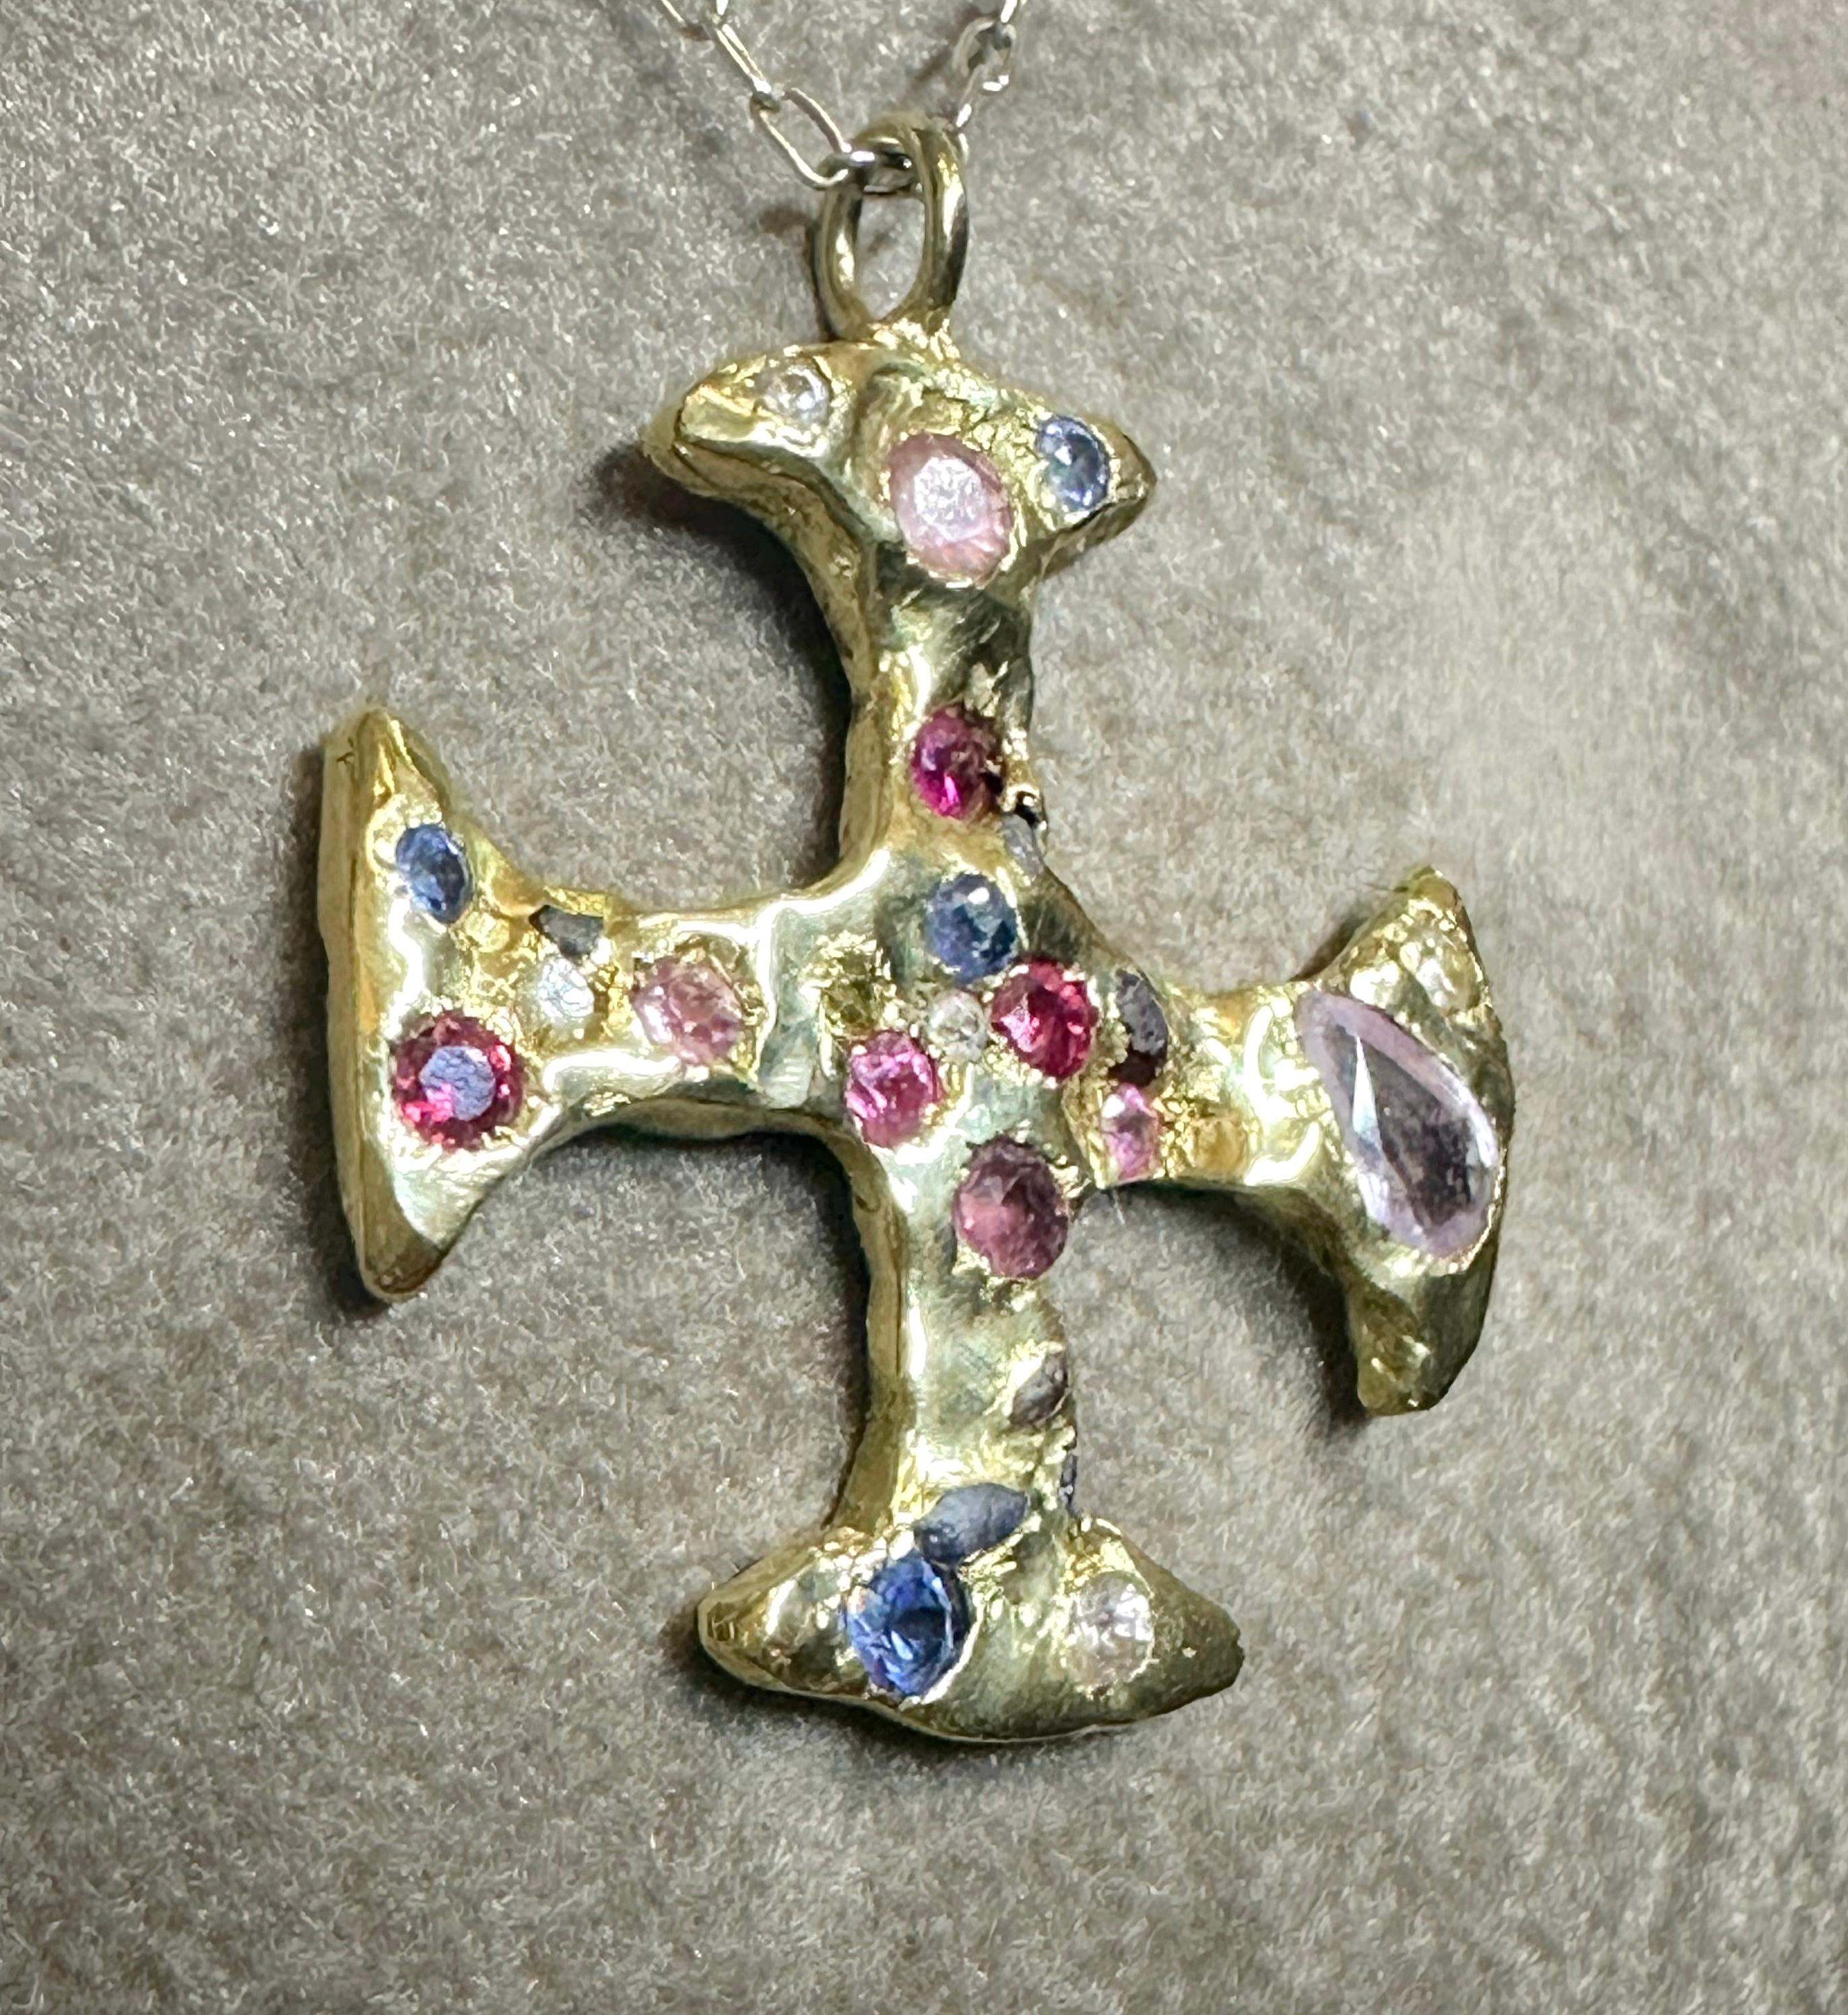 Brilliant Cut Divine Byzantine Modern 18K Yellow Gold Cross Adorned with Sapphires